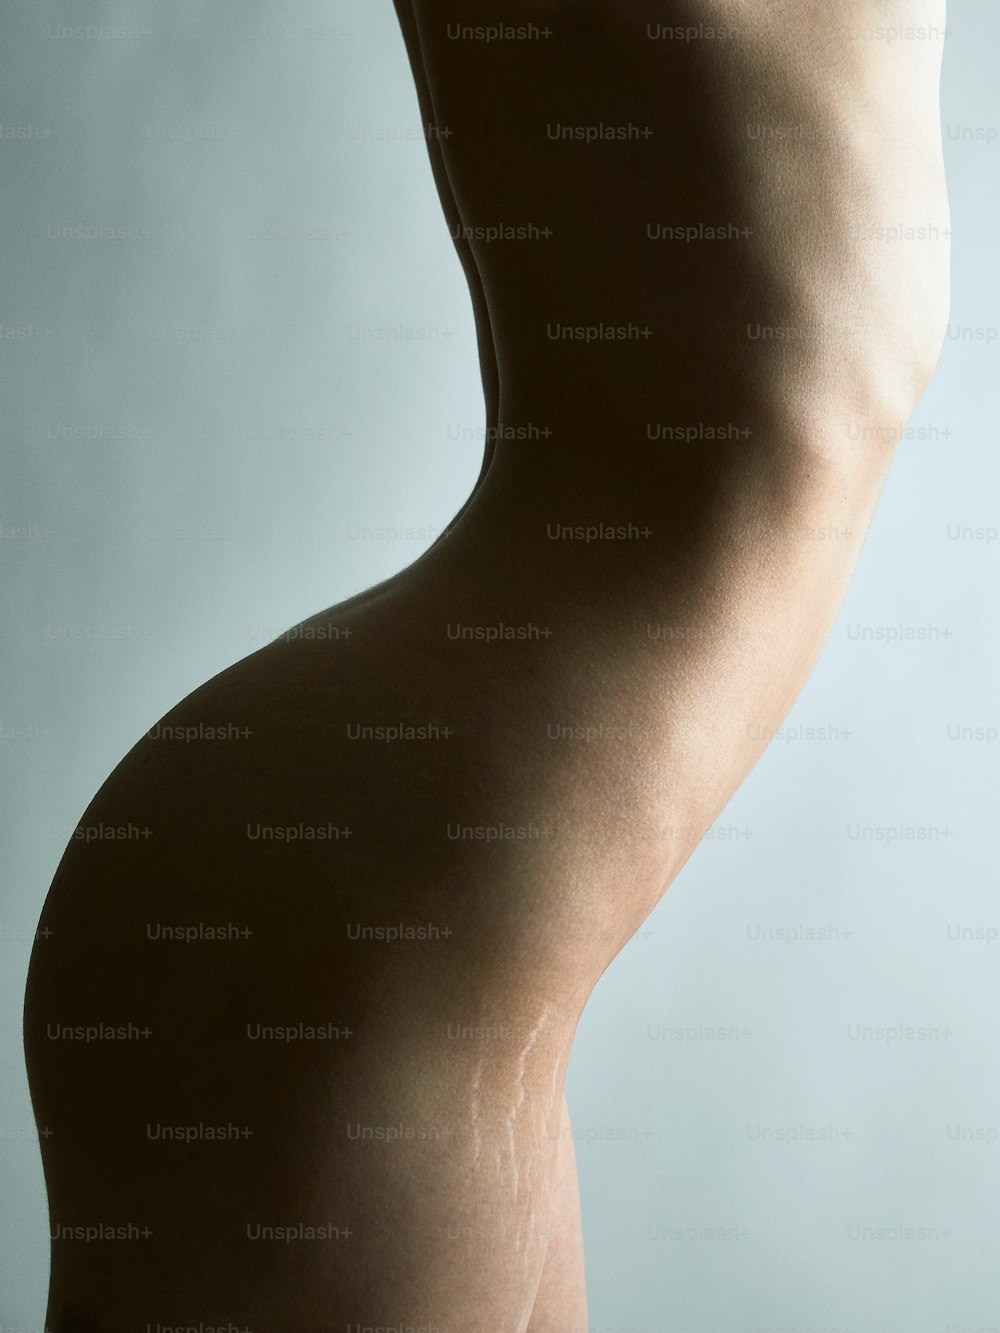 a woman's naked body is shown against a gray background